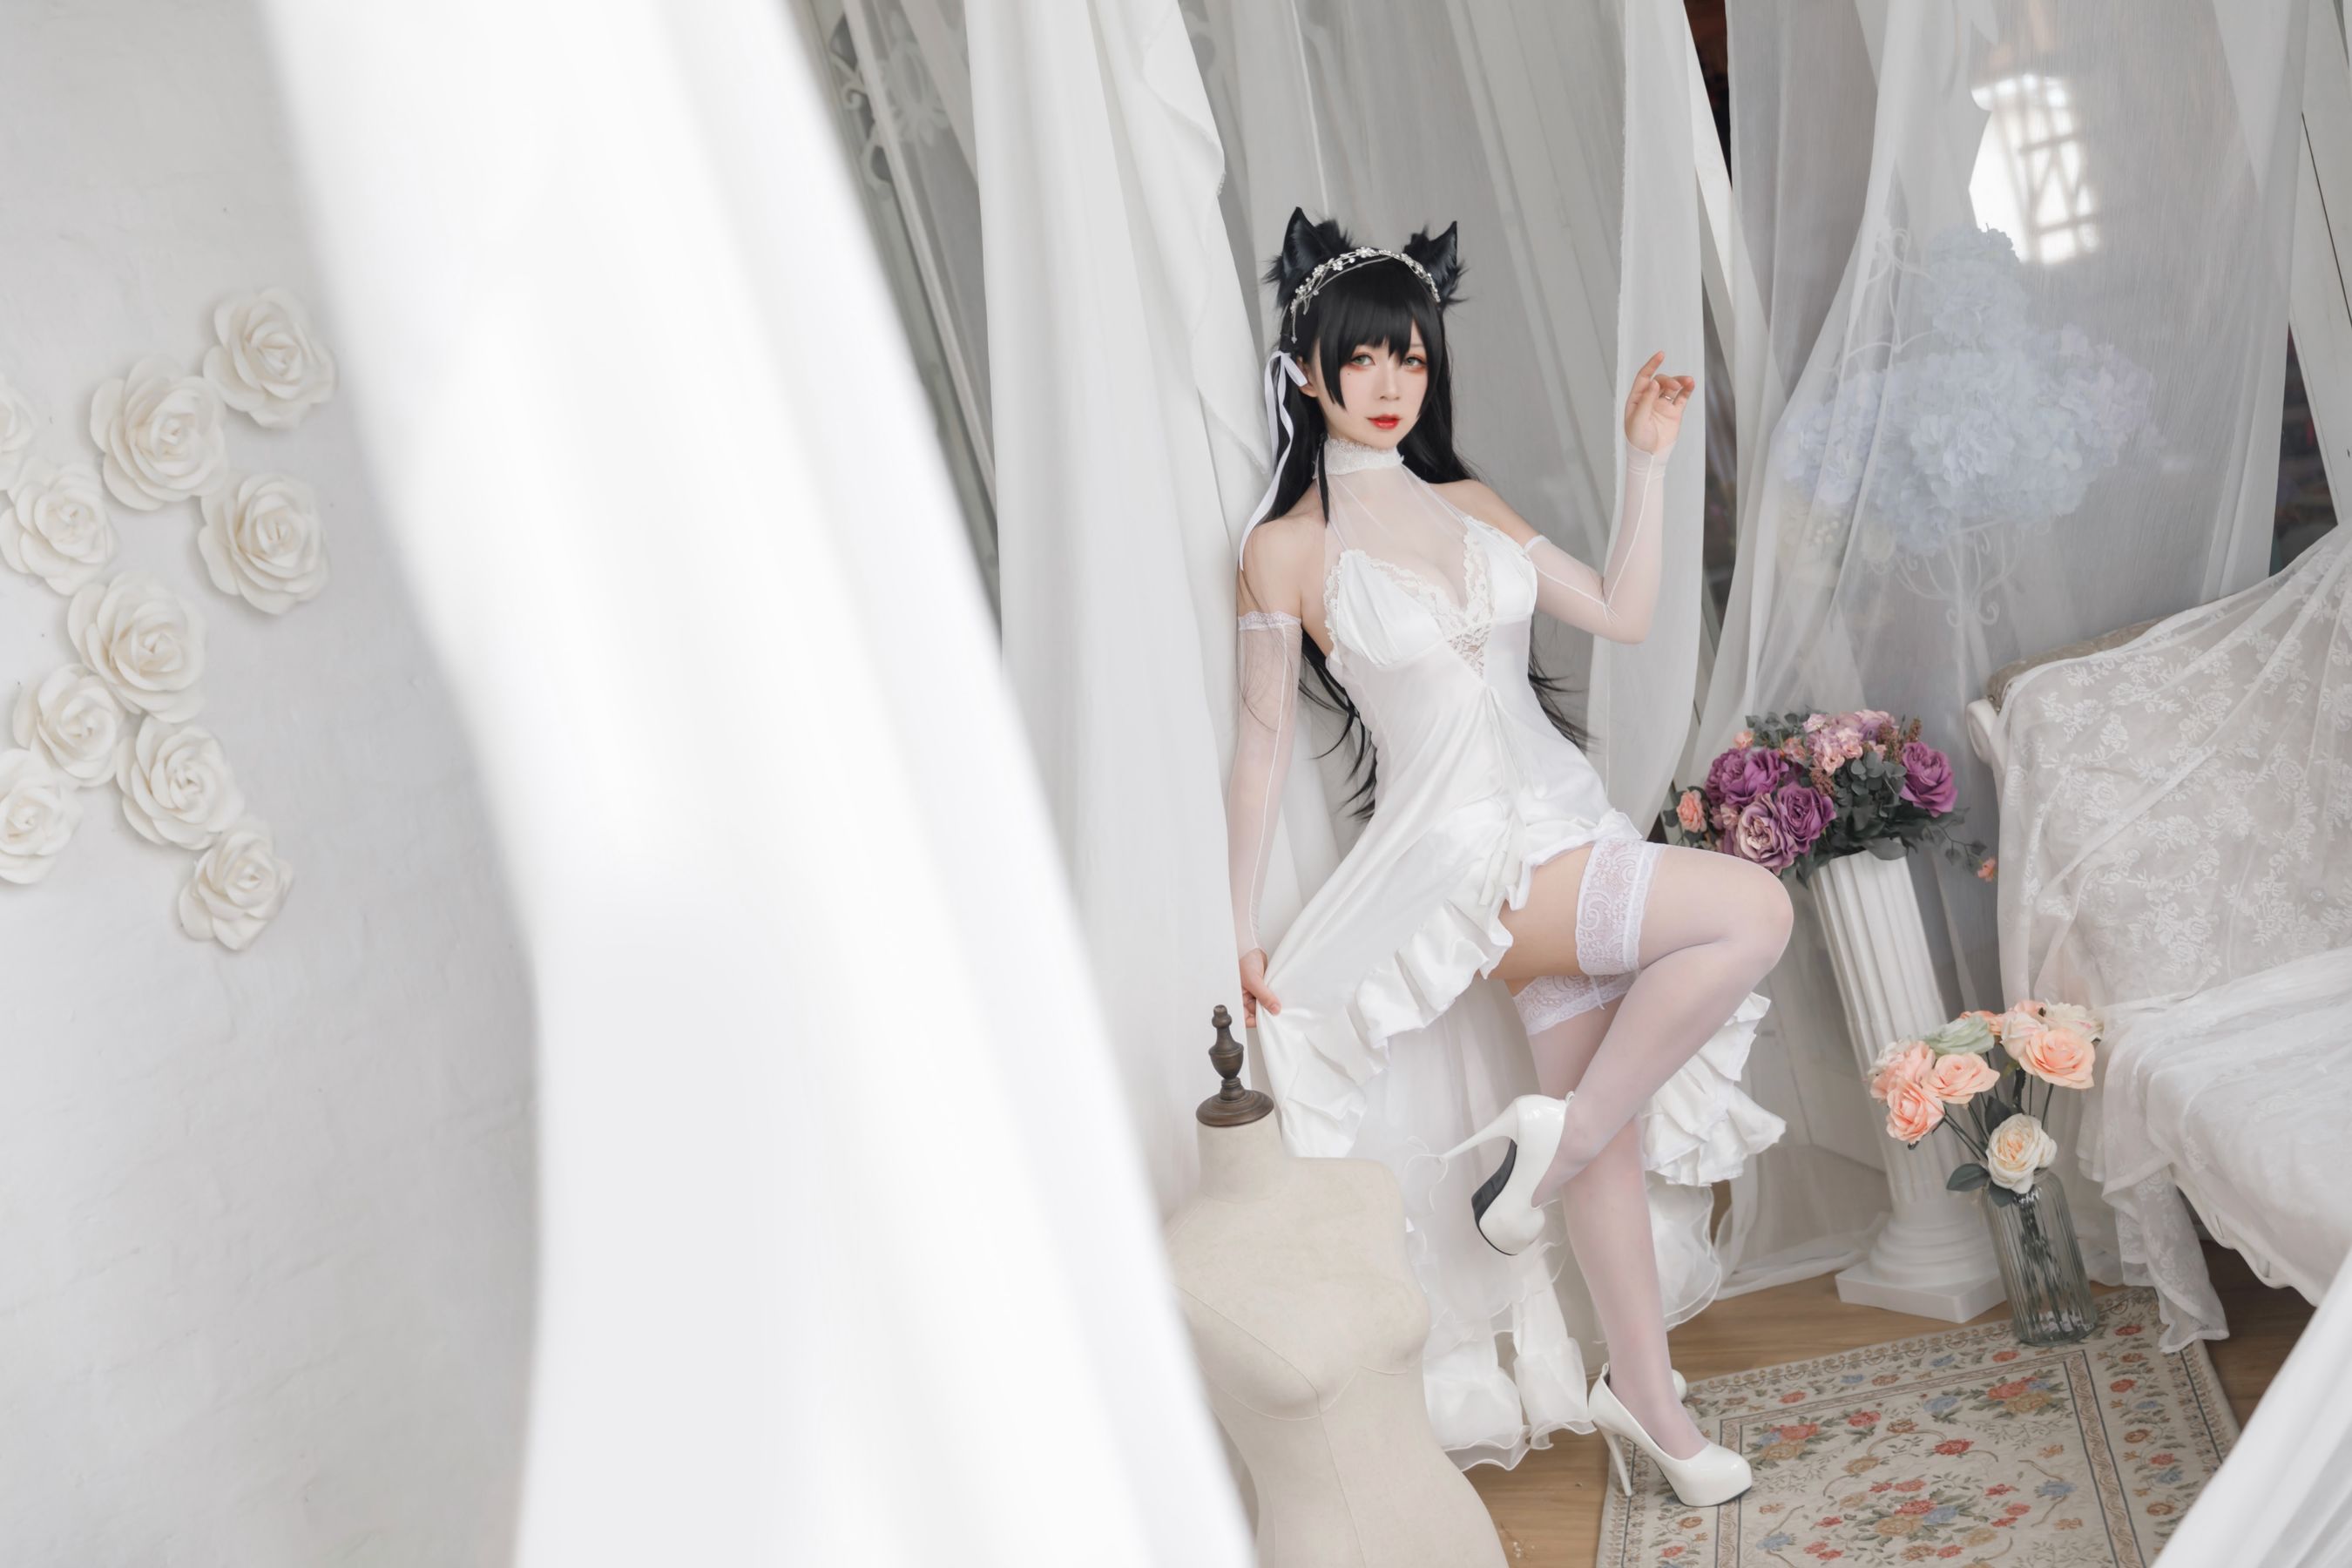 [COS welfare] Anime blogger cherry sauce W “Aixing Flower Marriage” photo set